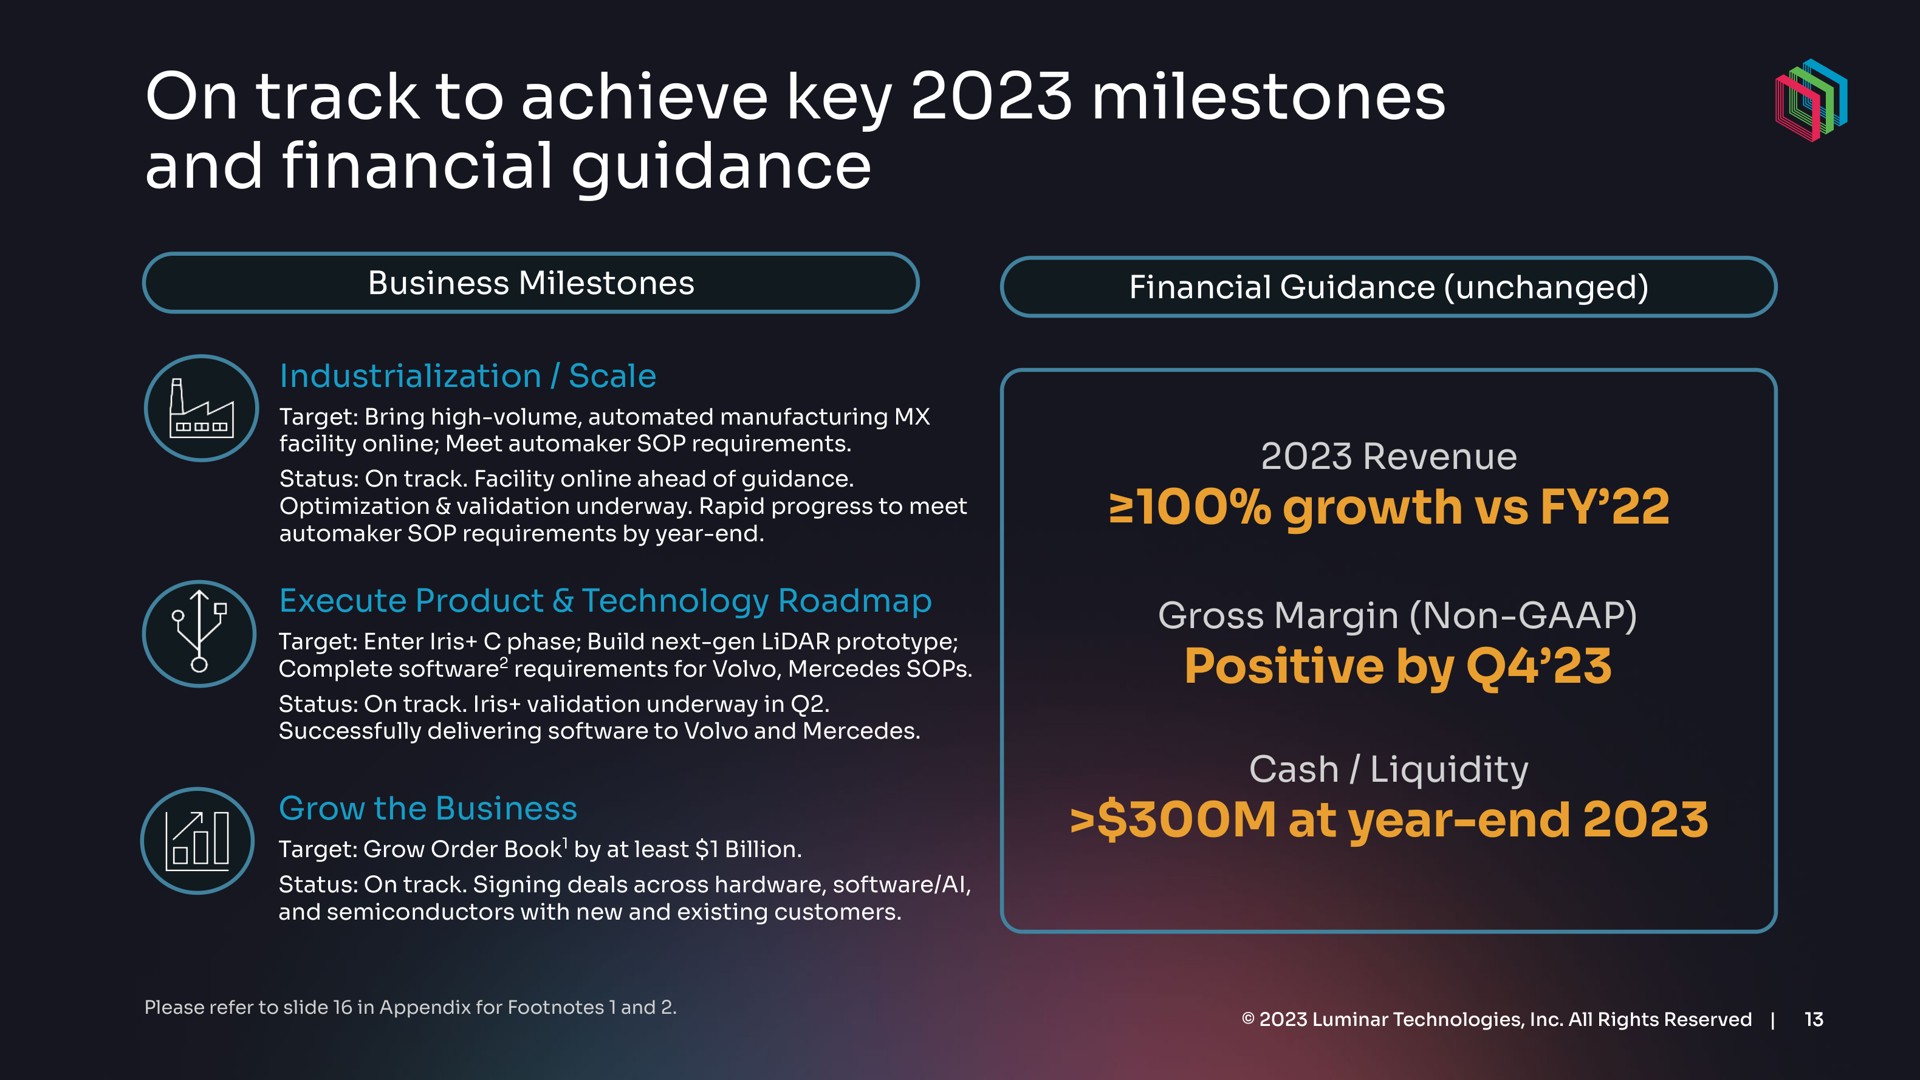 on track to achieve key milestones and guidance financial | Luminar